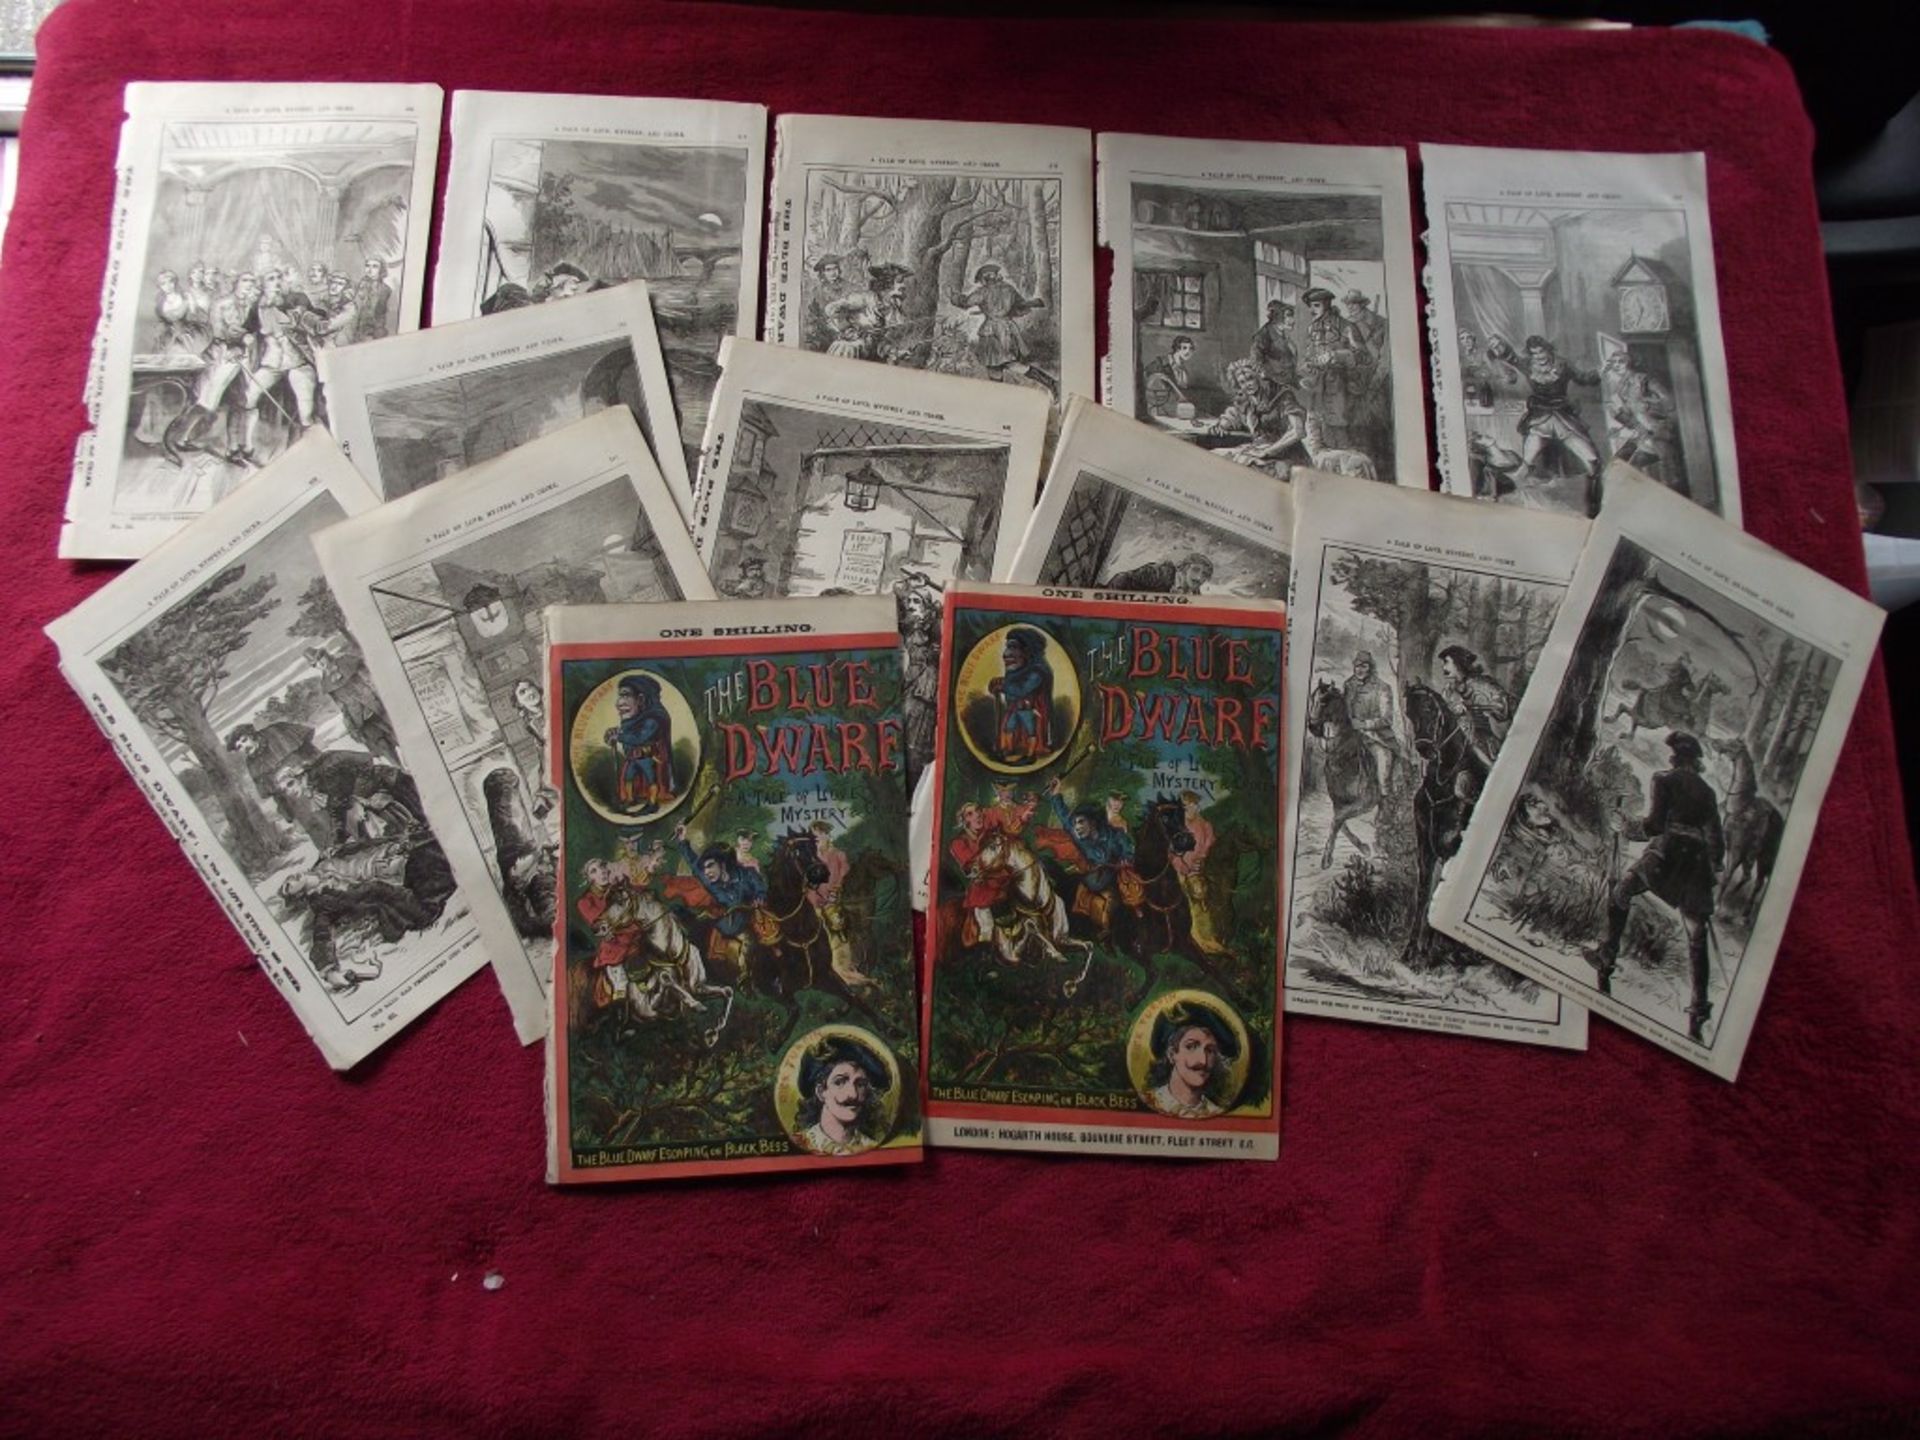 16 x Lithographic Prints From The Blue Dwarf - Percy B. St John - + 14 Prints - Circa 1880's - Image 25 of 39